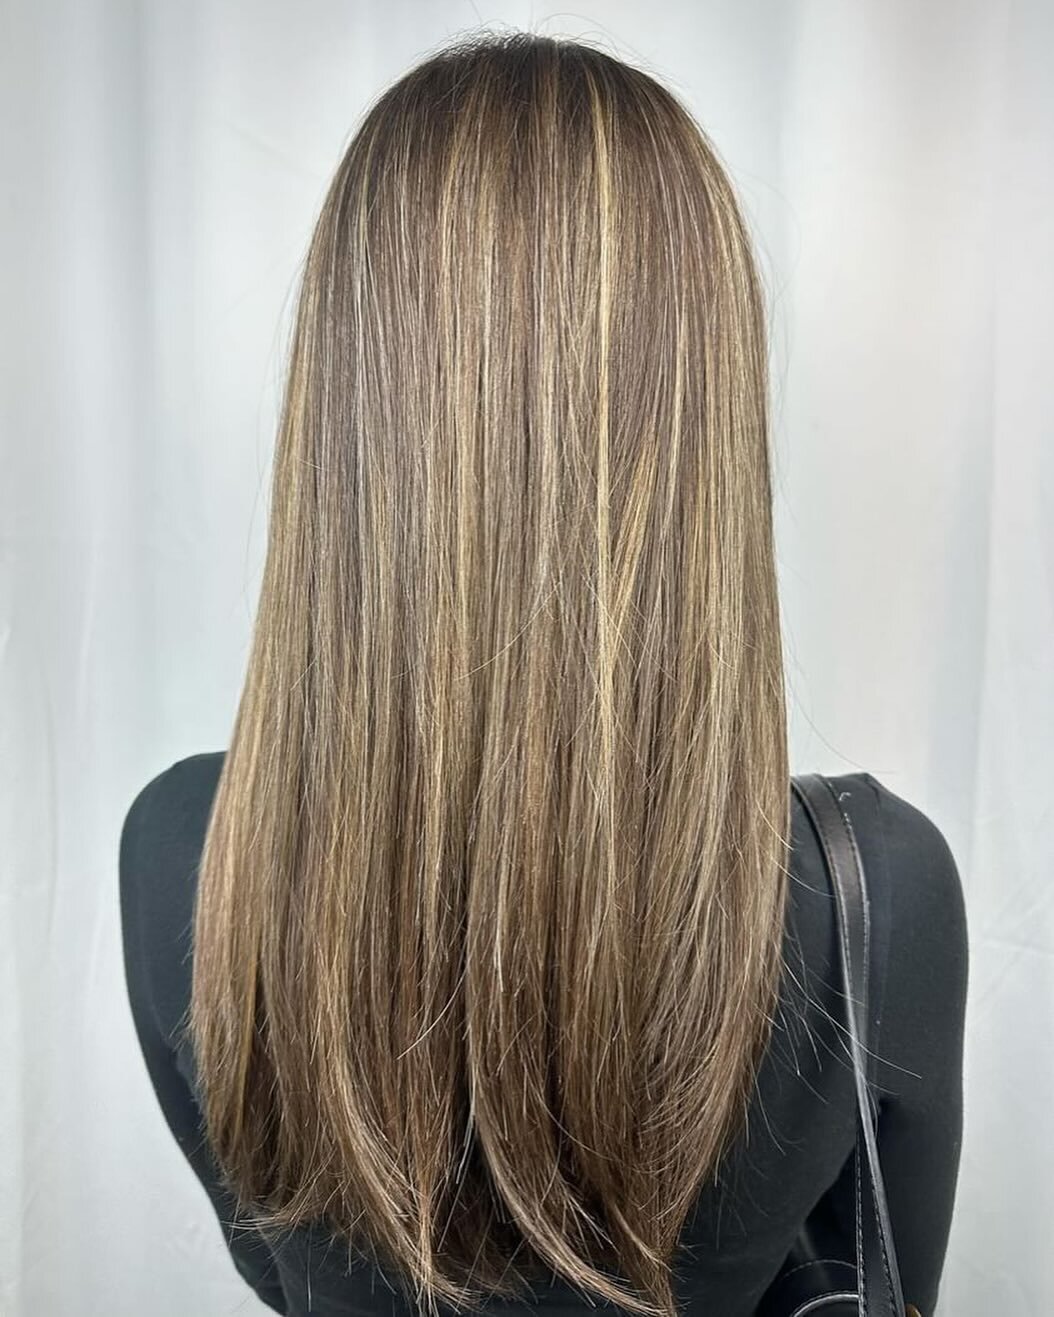 Blending beauty, one highlight at a time! 💫✨ Embrace the seamless transformation!

Hair by: Averie
Call to book your transformation 916.691.2000
#elkgrovehairsalon #elkgrovehair #behindthechair_com #sacramentohair